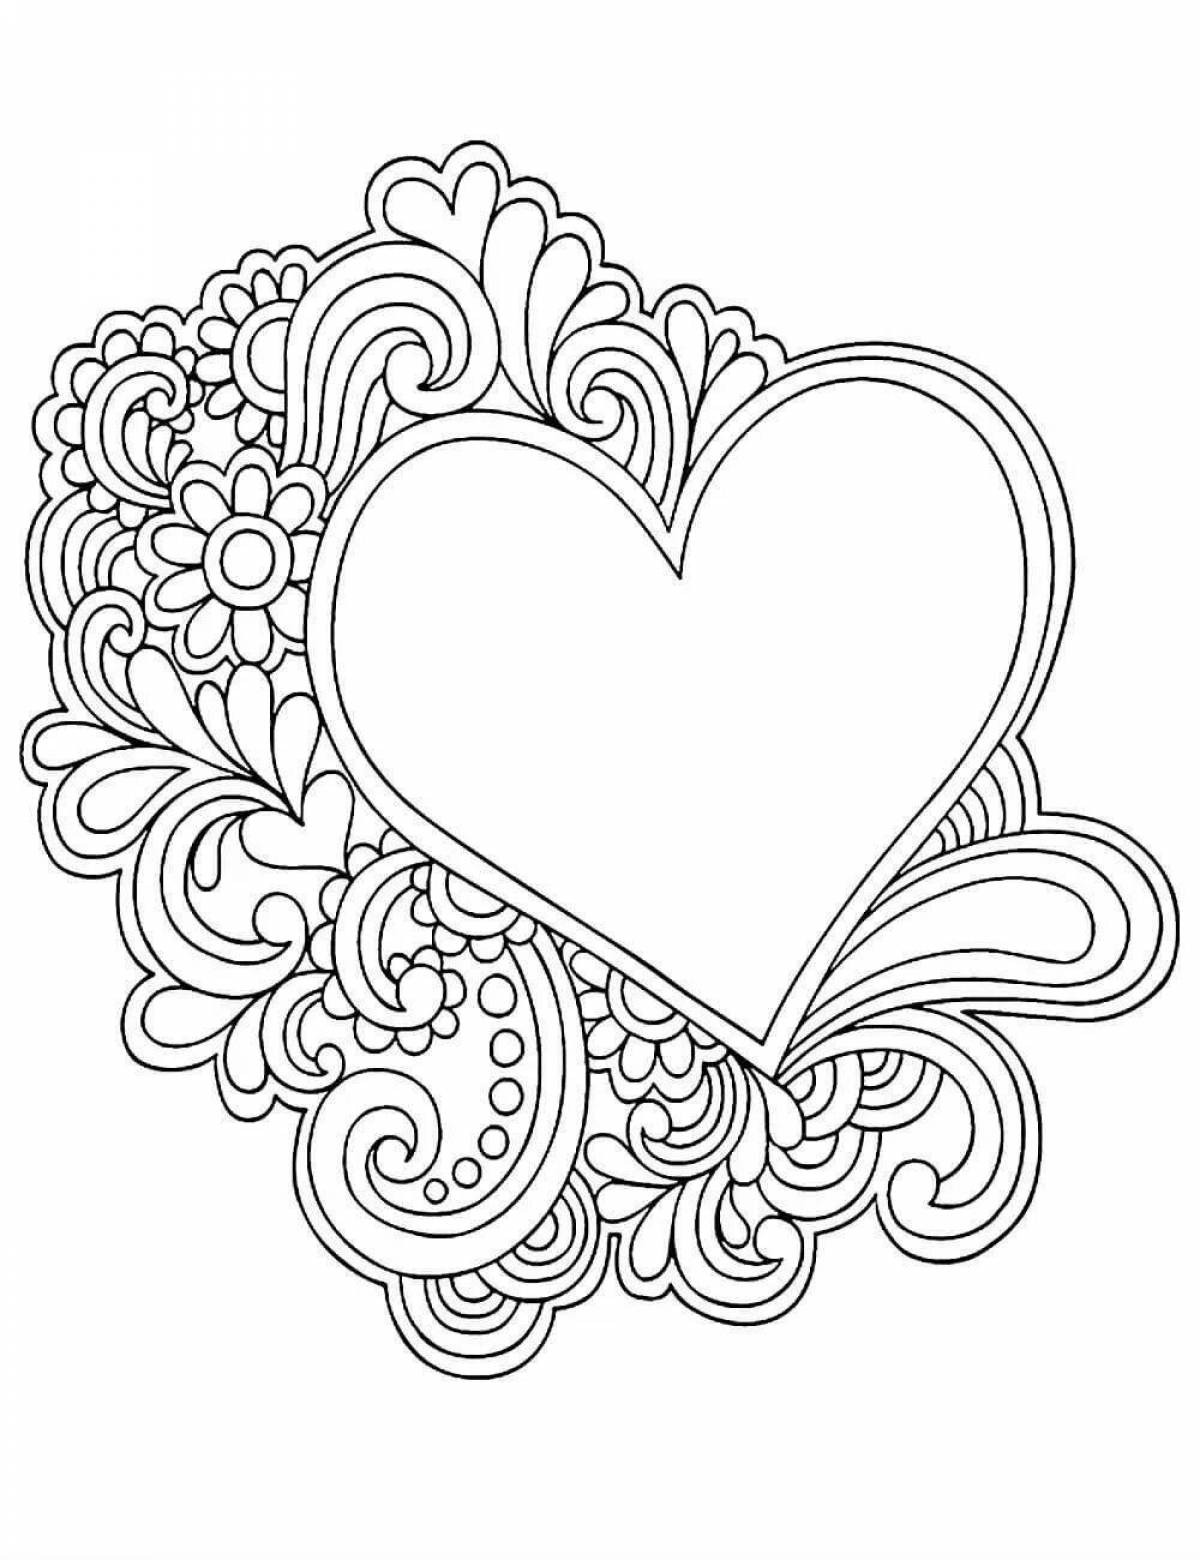 Coloring page proud grandmother